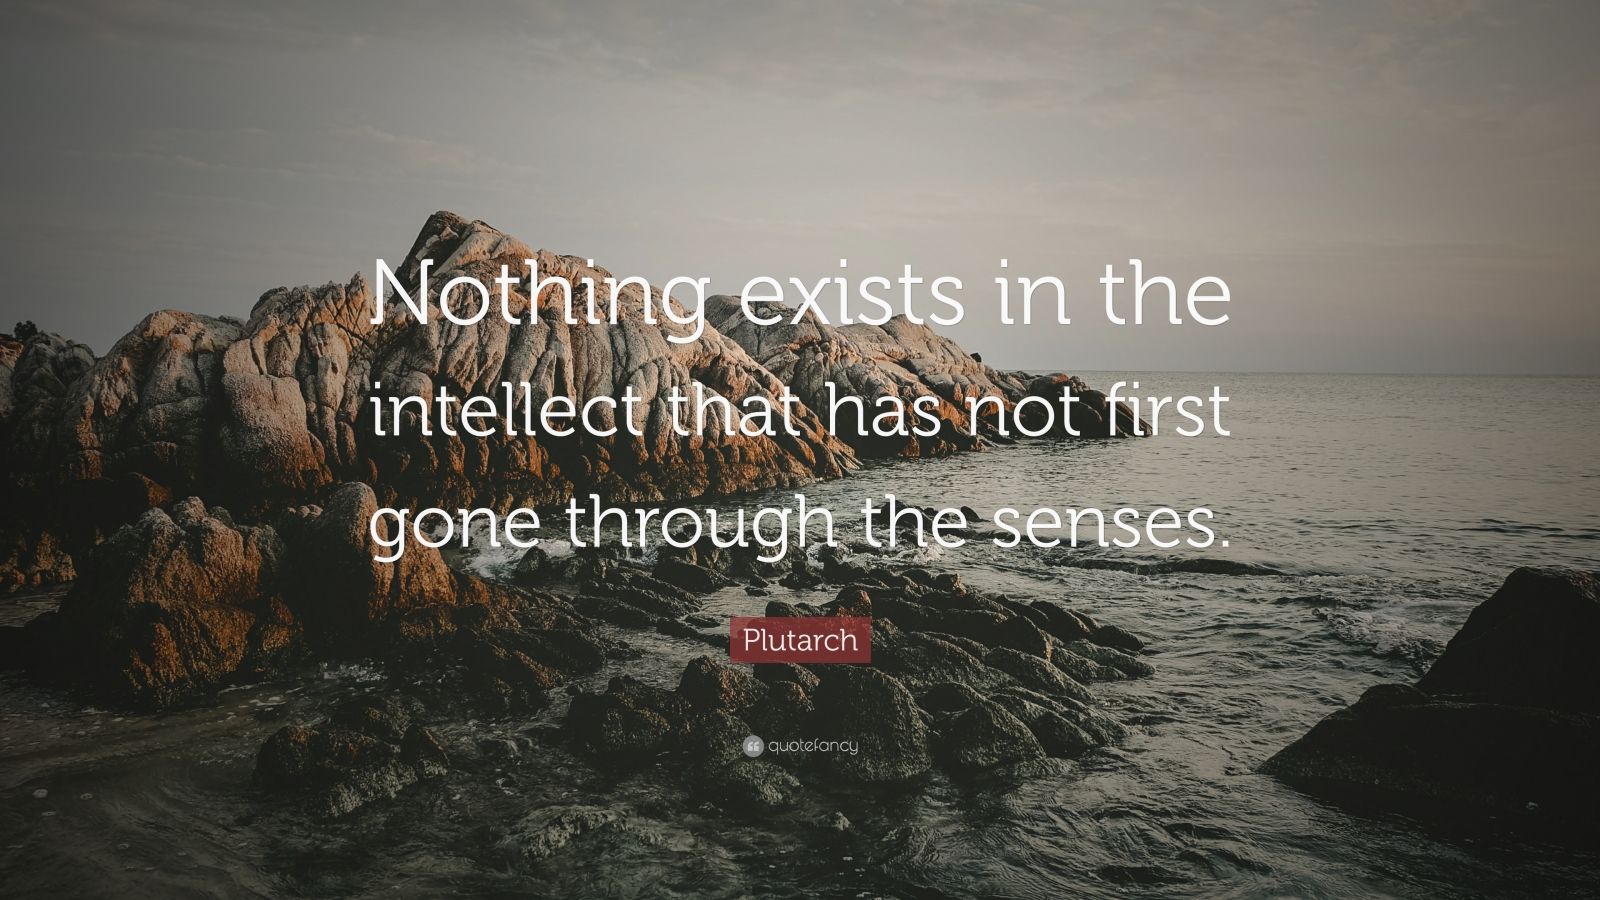 Plutarch Quote: “Nothing exists in the intellect that has not first ...